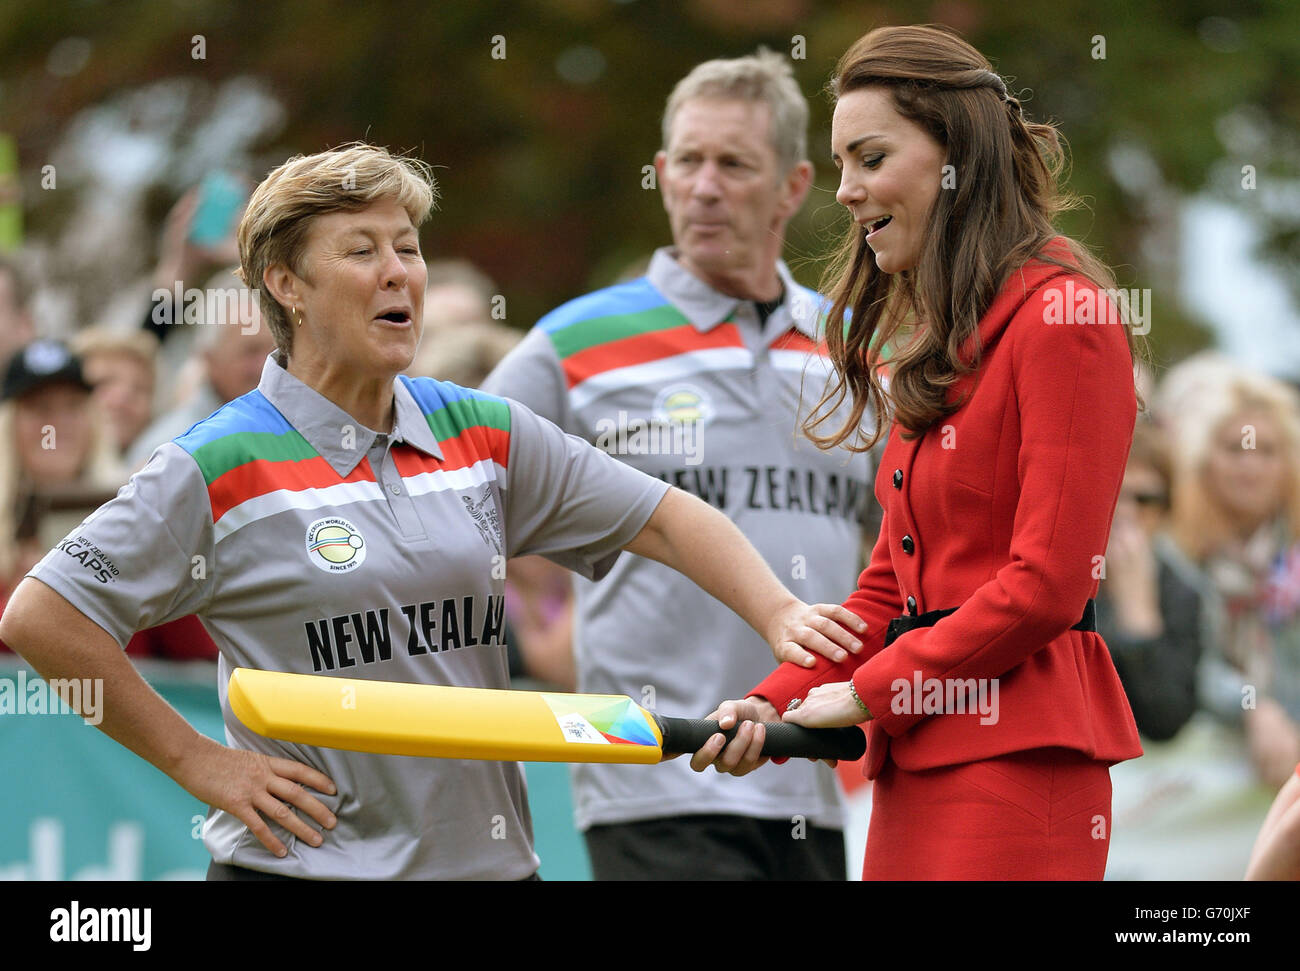 The Duchess of Cambridge prepares to bat to The Duke of Cambridge's bowling as they participates in a 2015 Cricket World Cup event in Christchurch during the eighth day of their official tour to New Zealand. Stock Photo